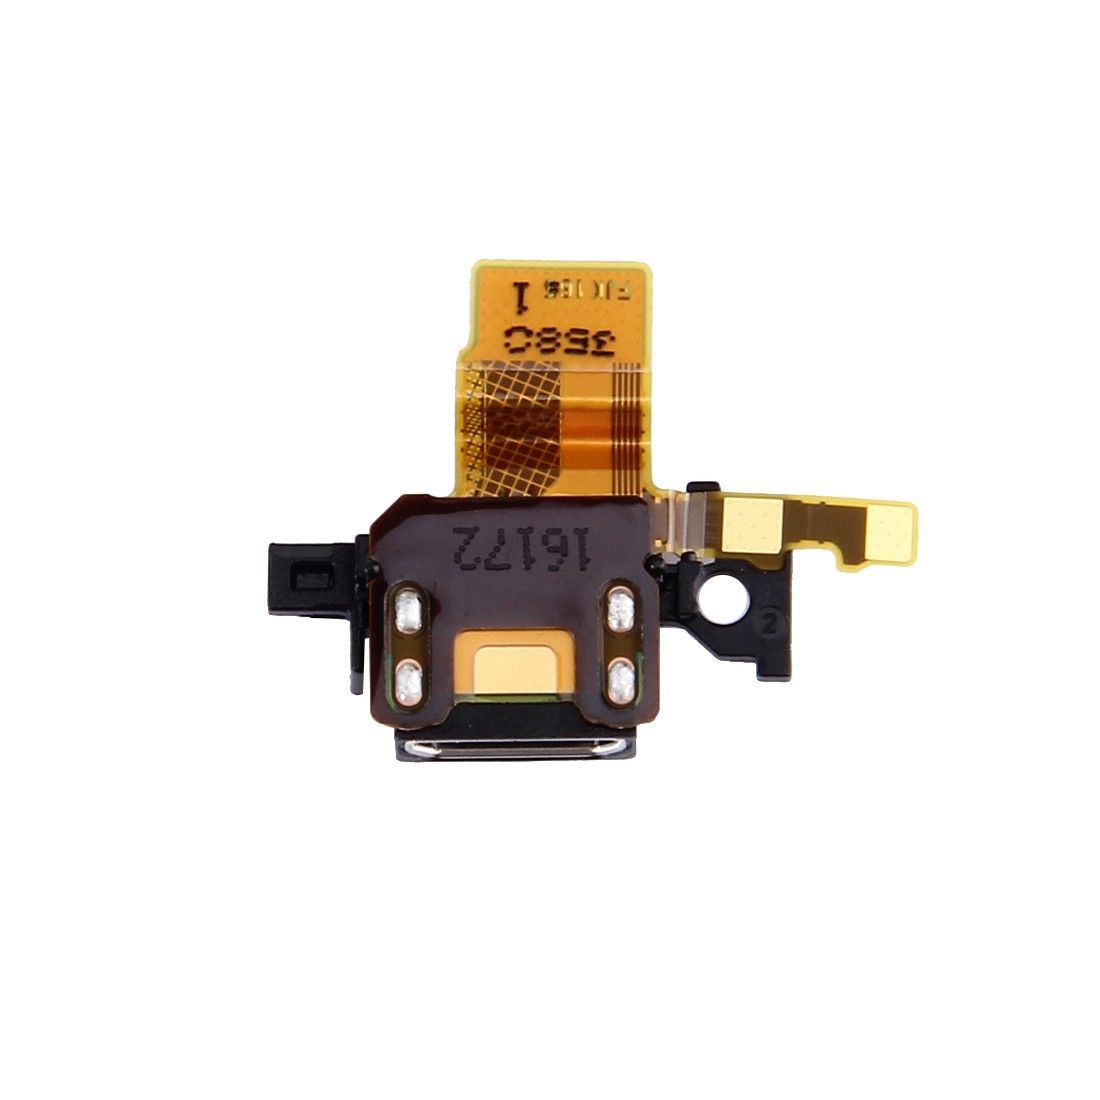 Sony Xperia X Micro USB Charging Port Flex Cable for [product_price] - First Help Tech